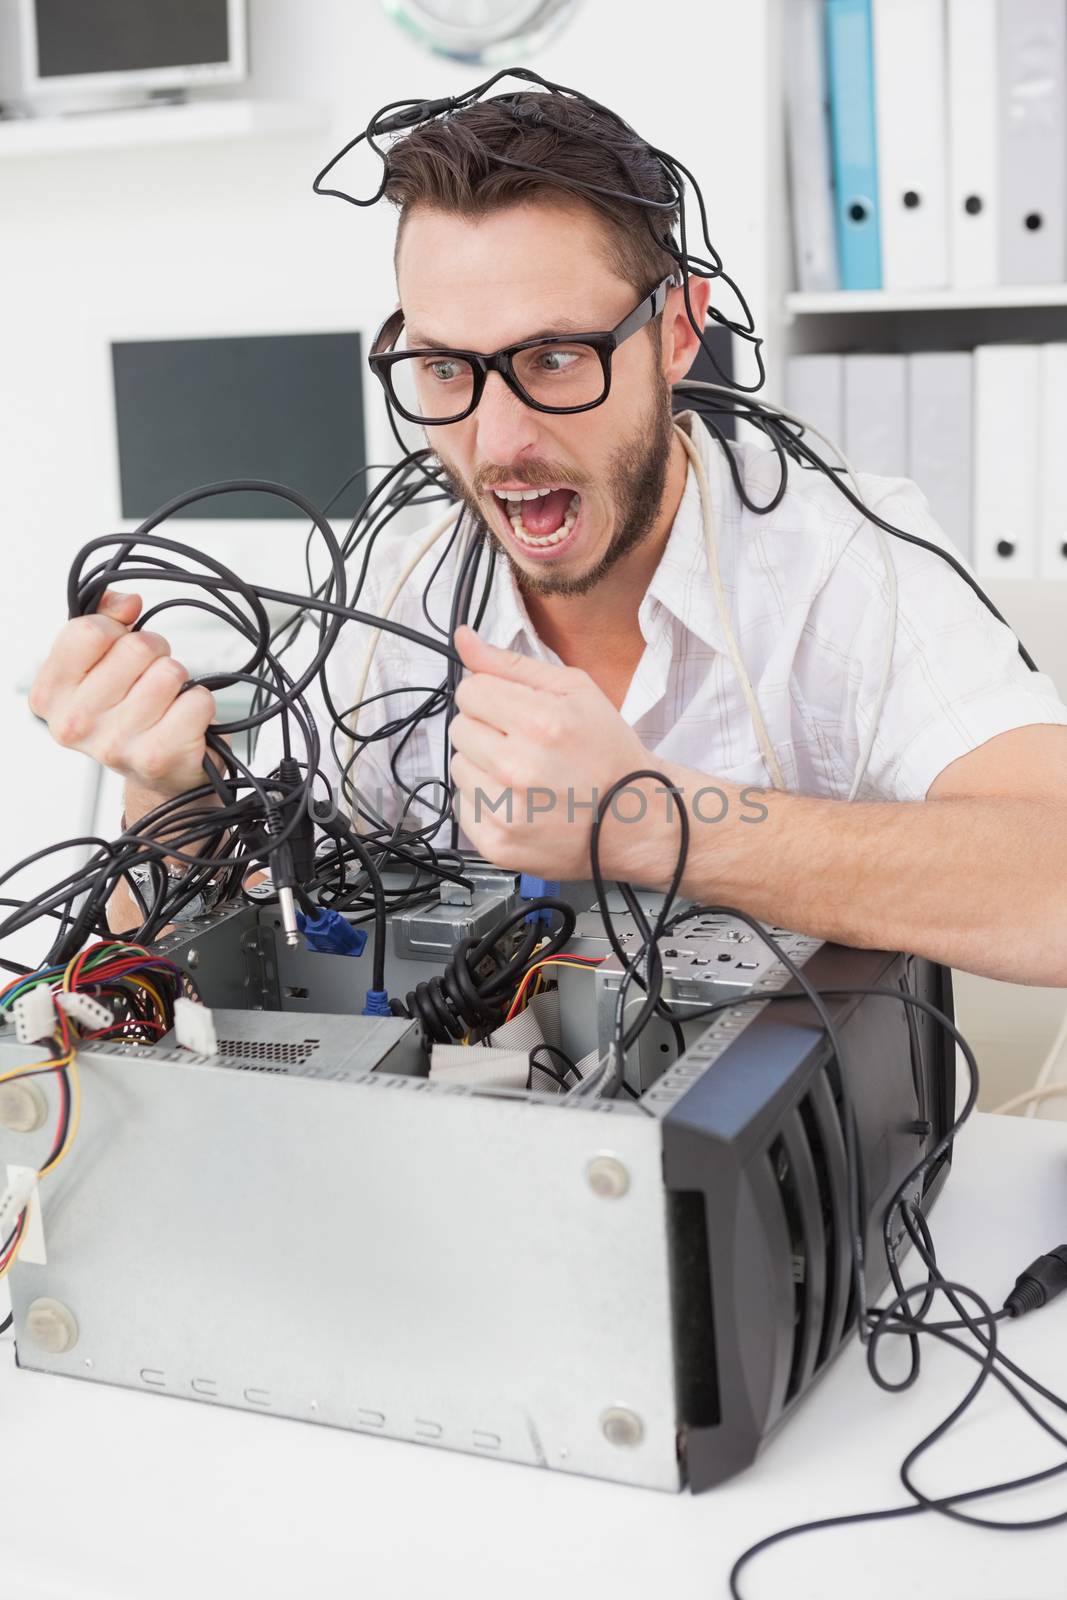 Angry computer engineer pulling wires by Wavebreakmedia